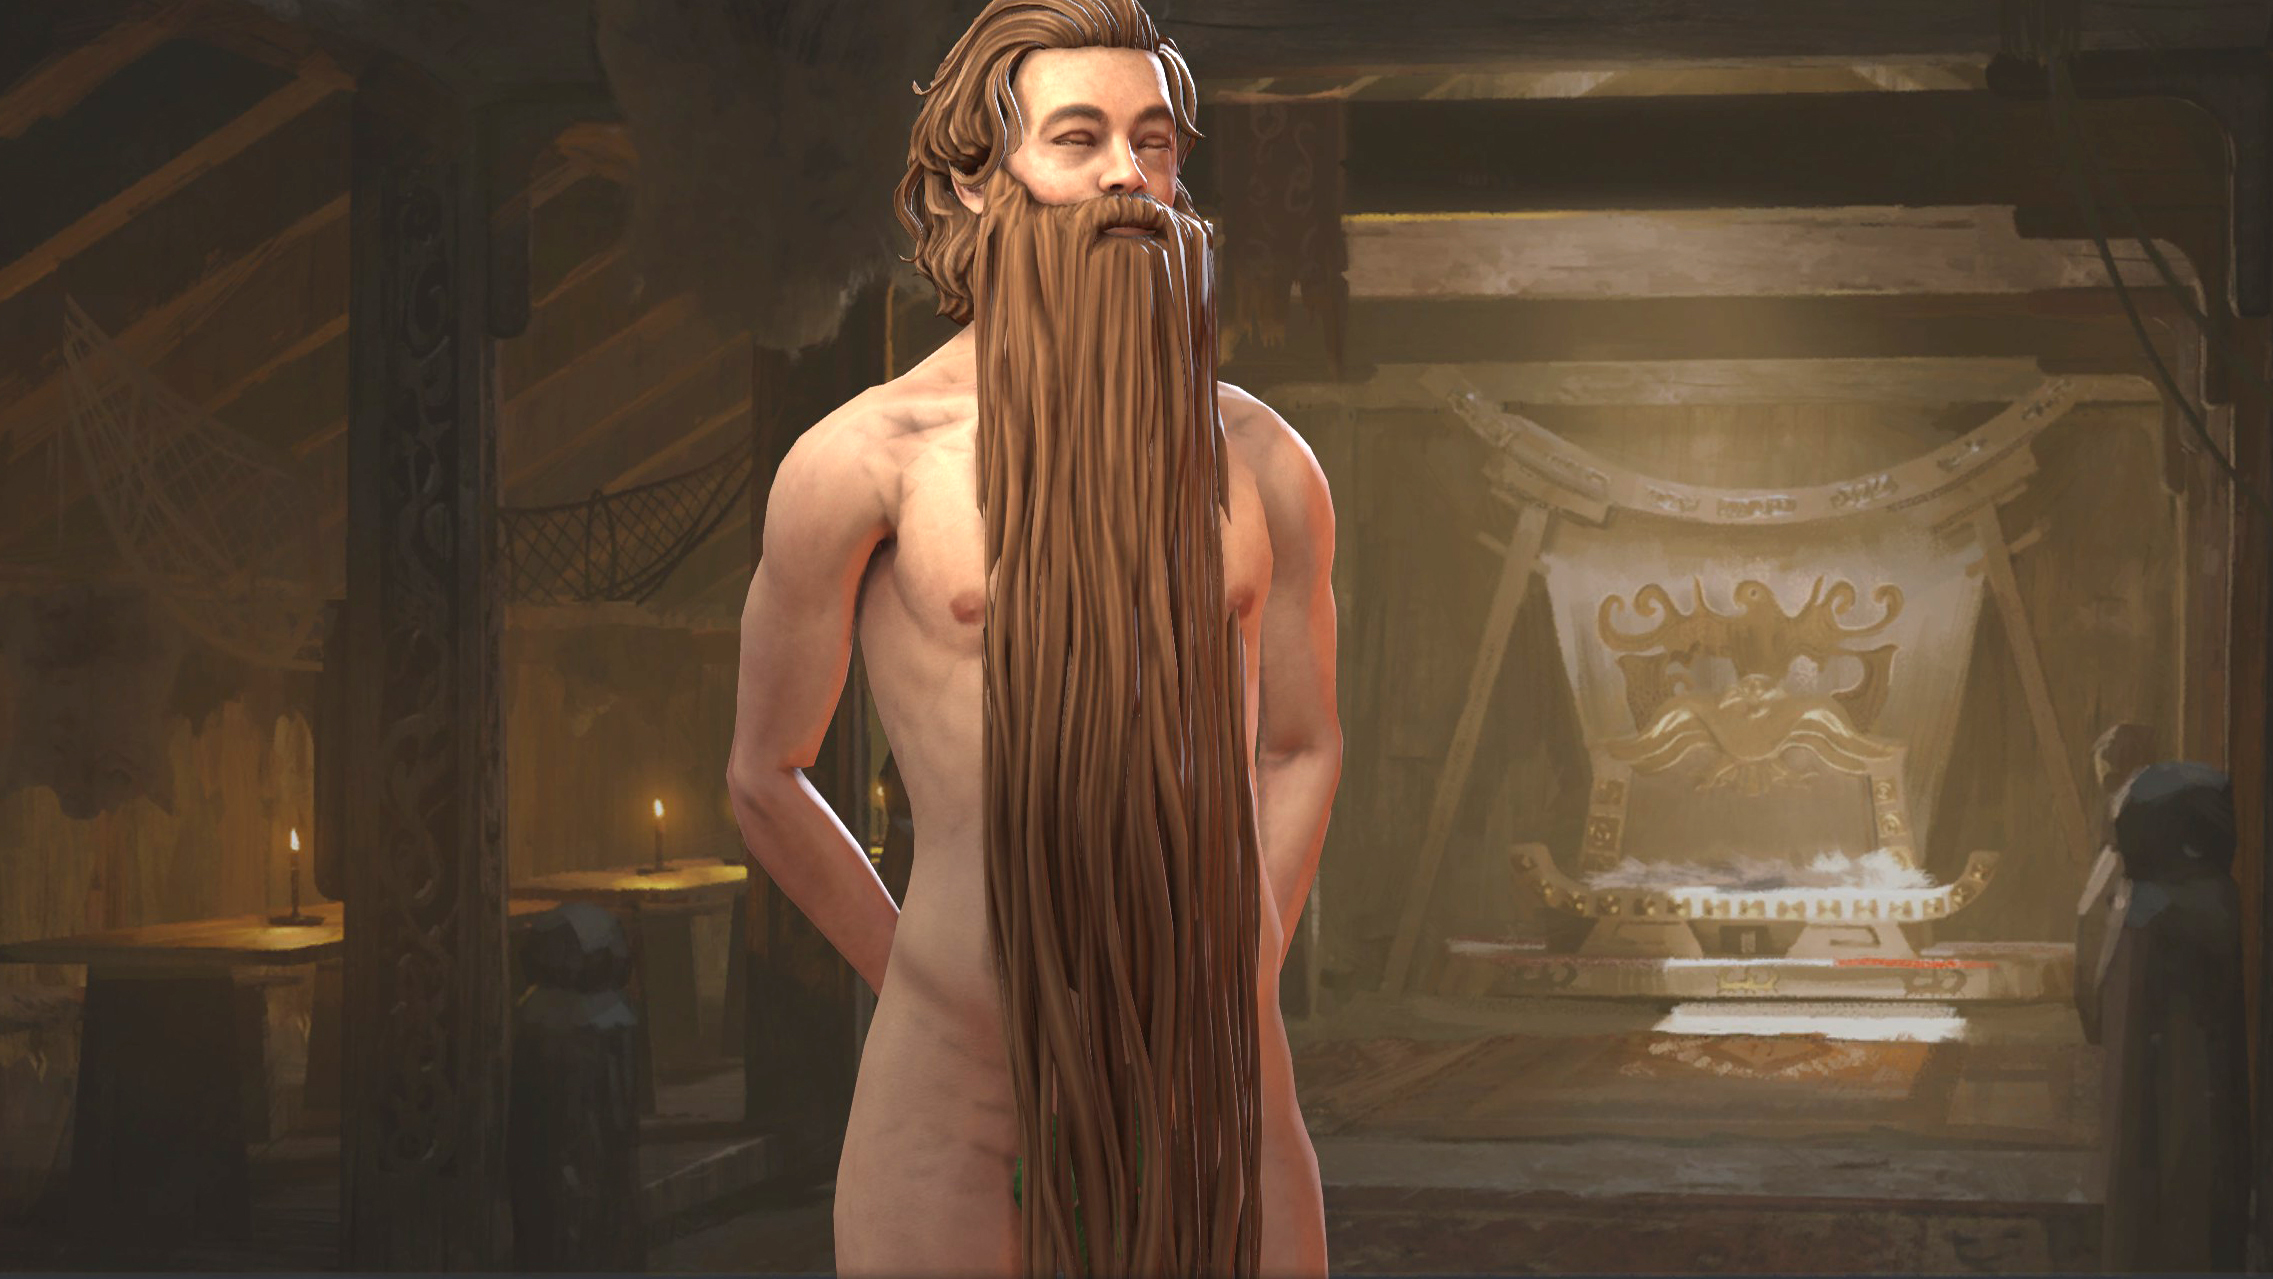  With this wizard beard mod there's no need for clothes in Crusader Kings 3 